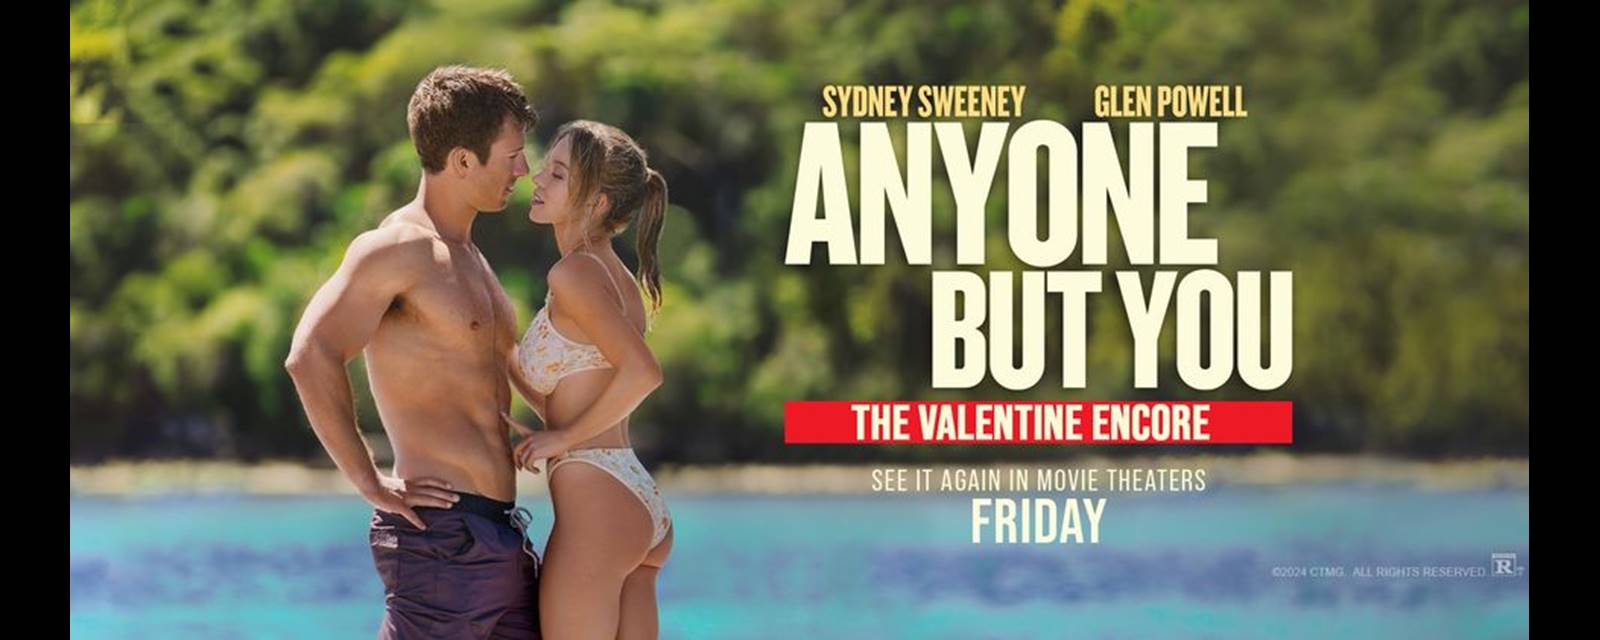 Anyone But You: The Valentine Encore